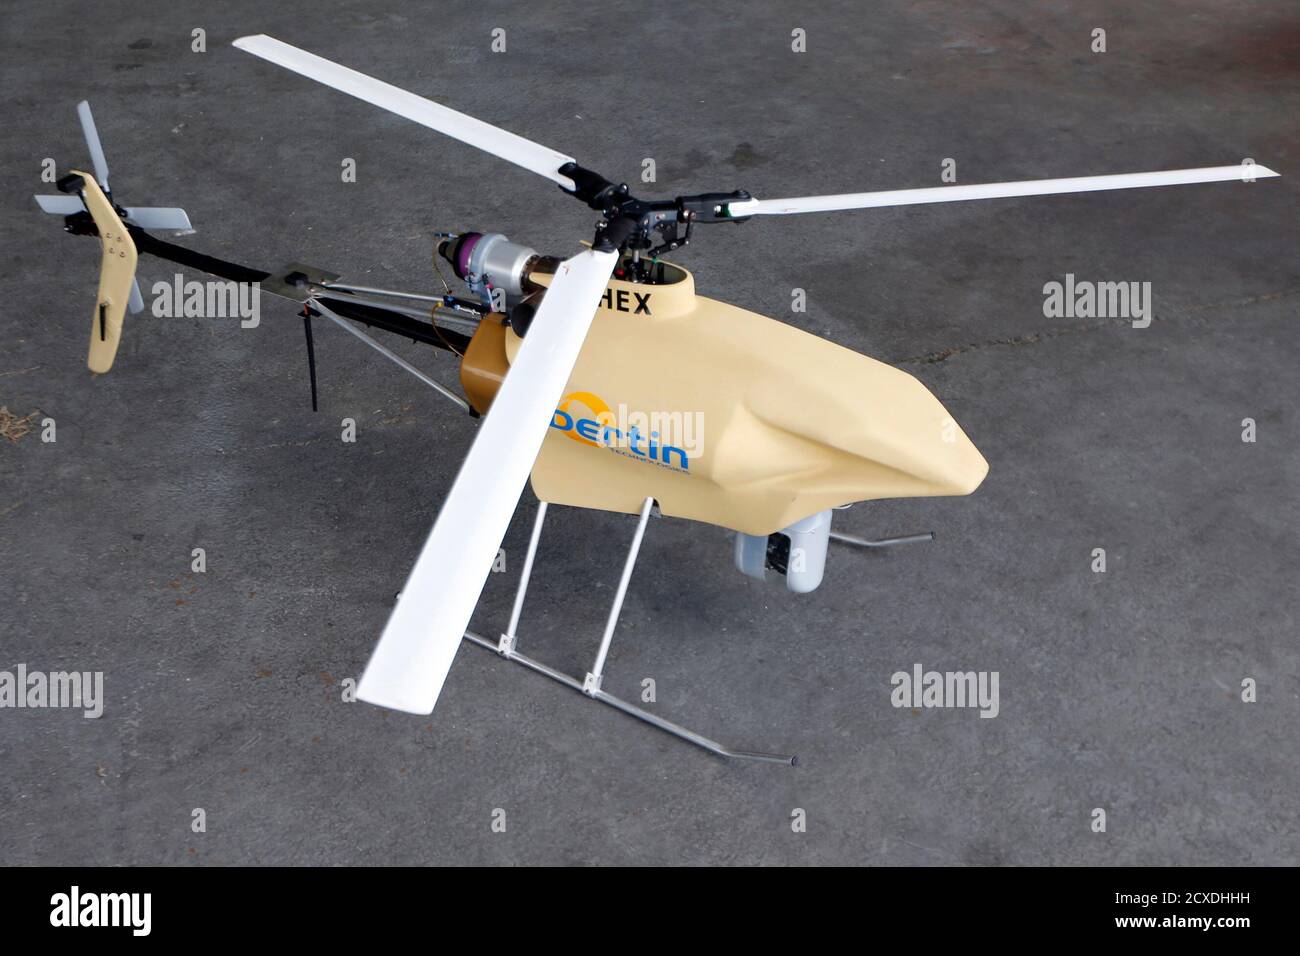 An Hovereye-Ex drone is displayed during an exhibition at Bretigny-sur-Orge,  near Paris, May 14, 2014. The drone made by French company Bertin  technologies, has a payload capacity up to 7kg and an